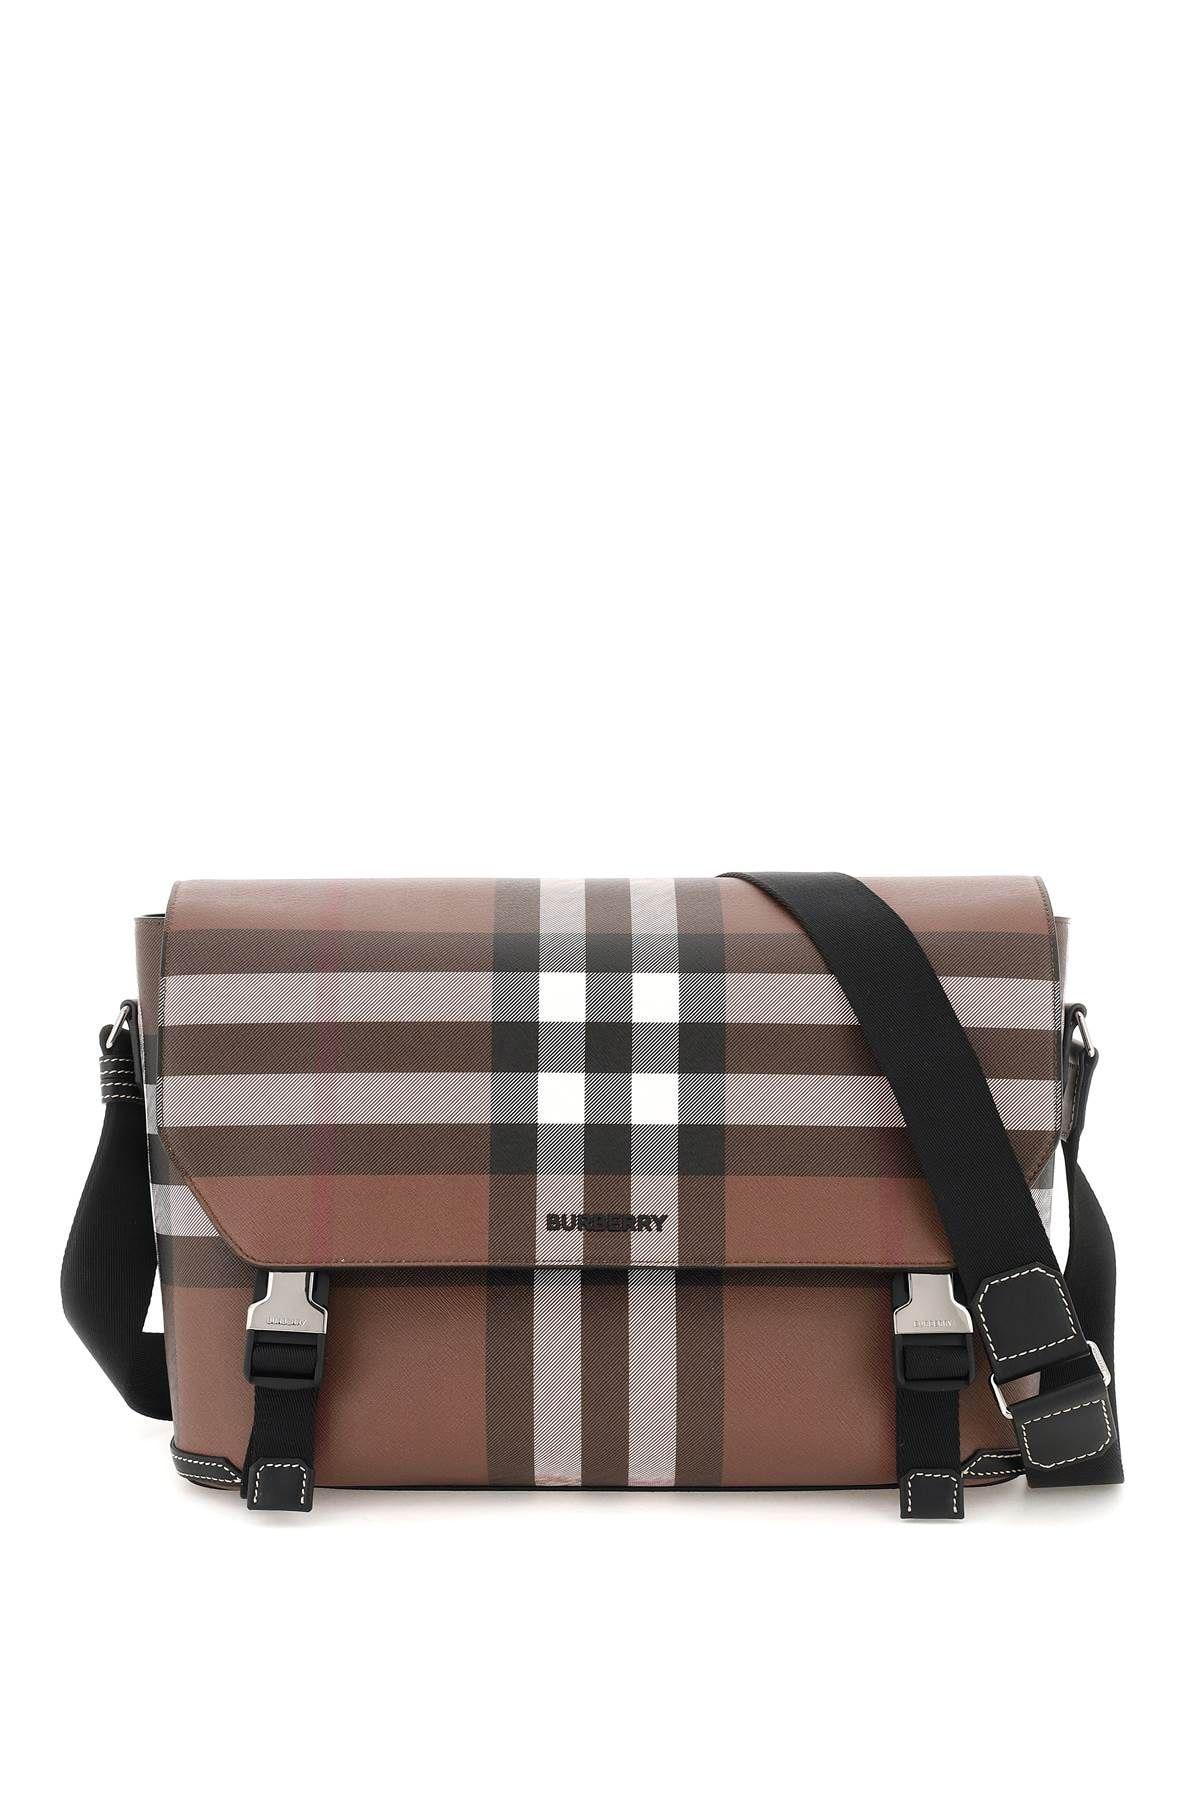 Burberry Exaggerated Check Coated Canvas Messenger Bag